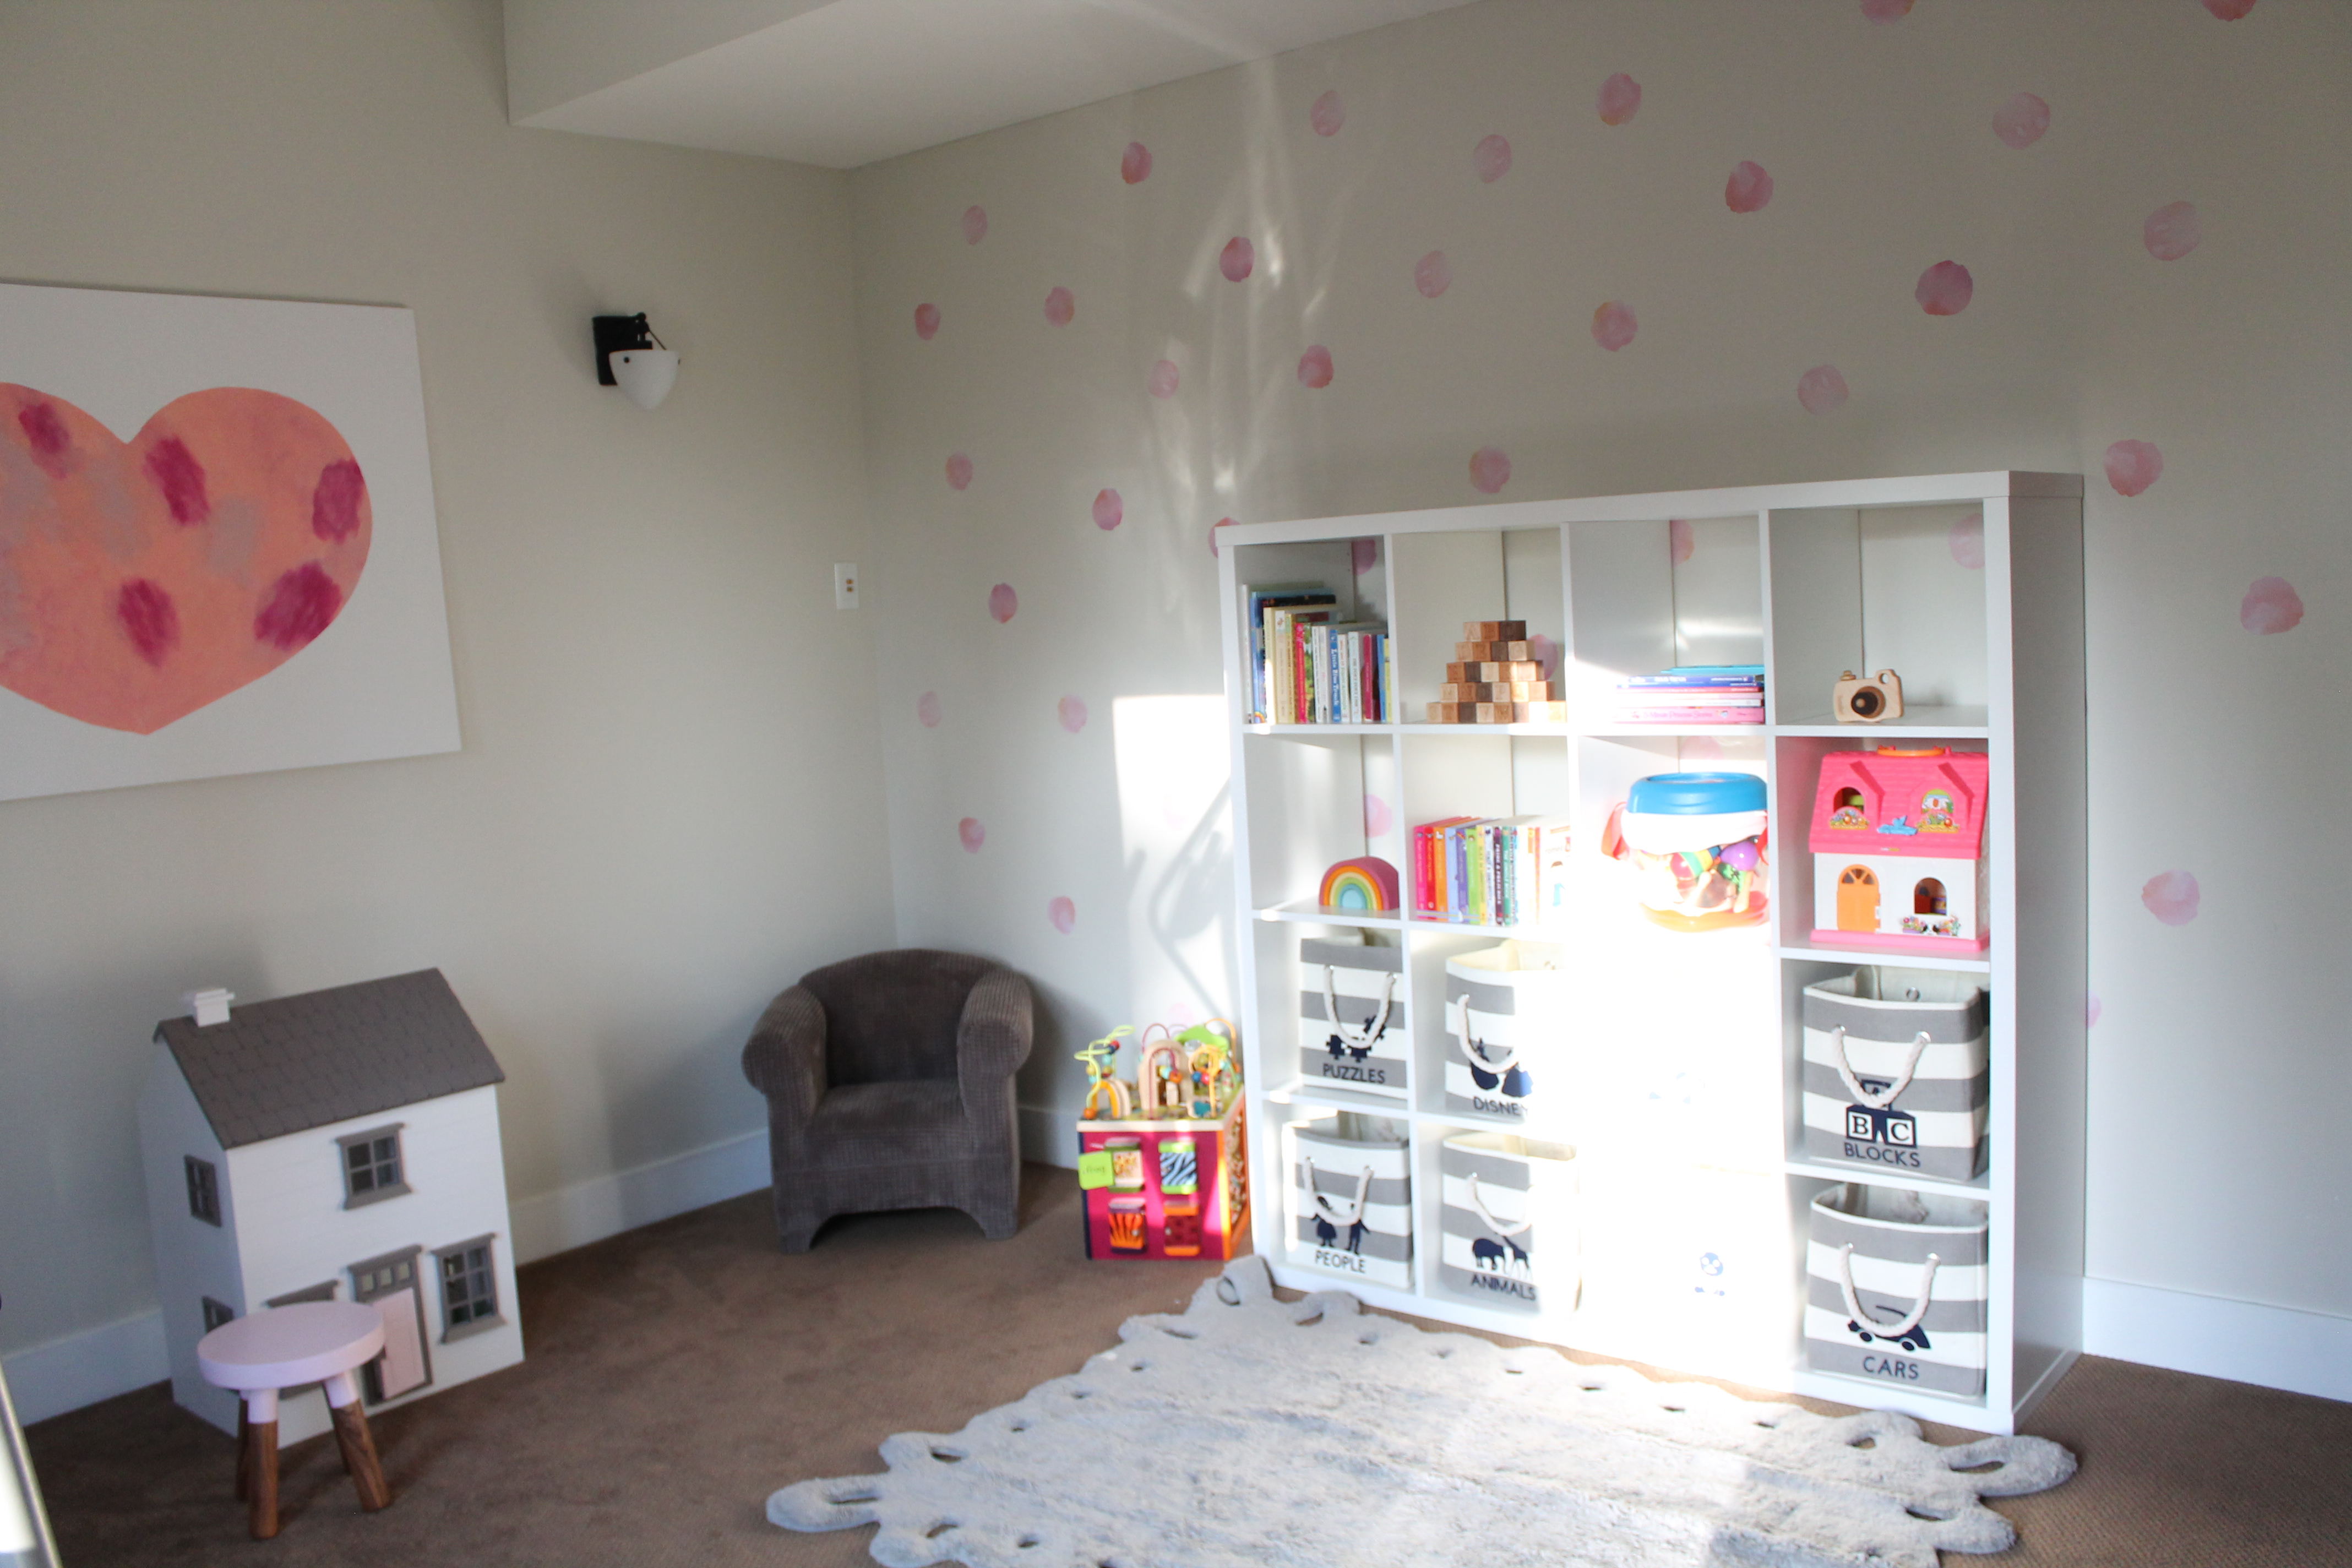 Playroom after